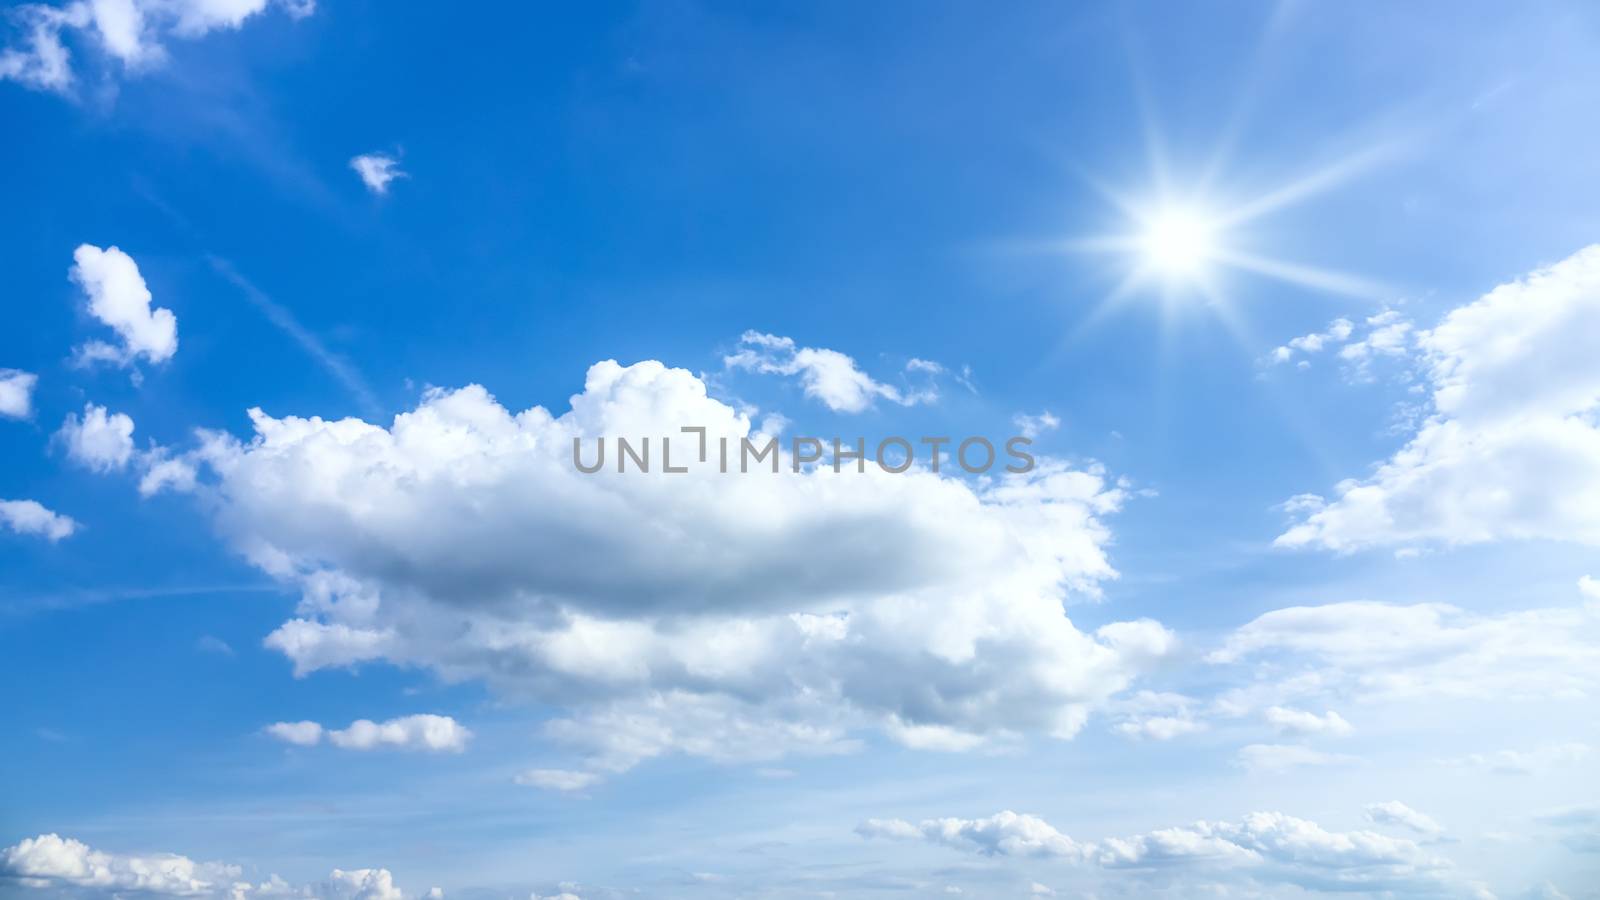 An image of a typical beautiful blue sky sun clouds background